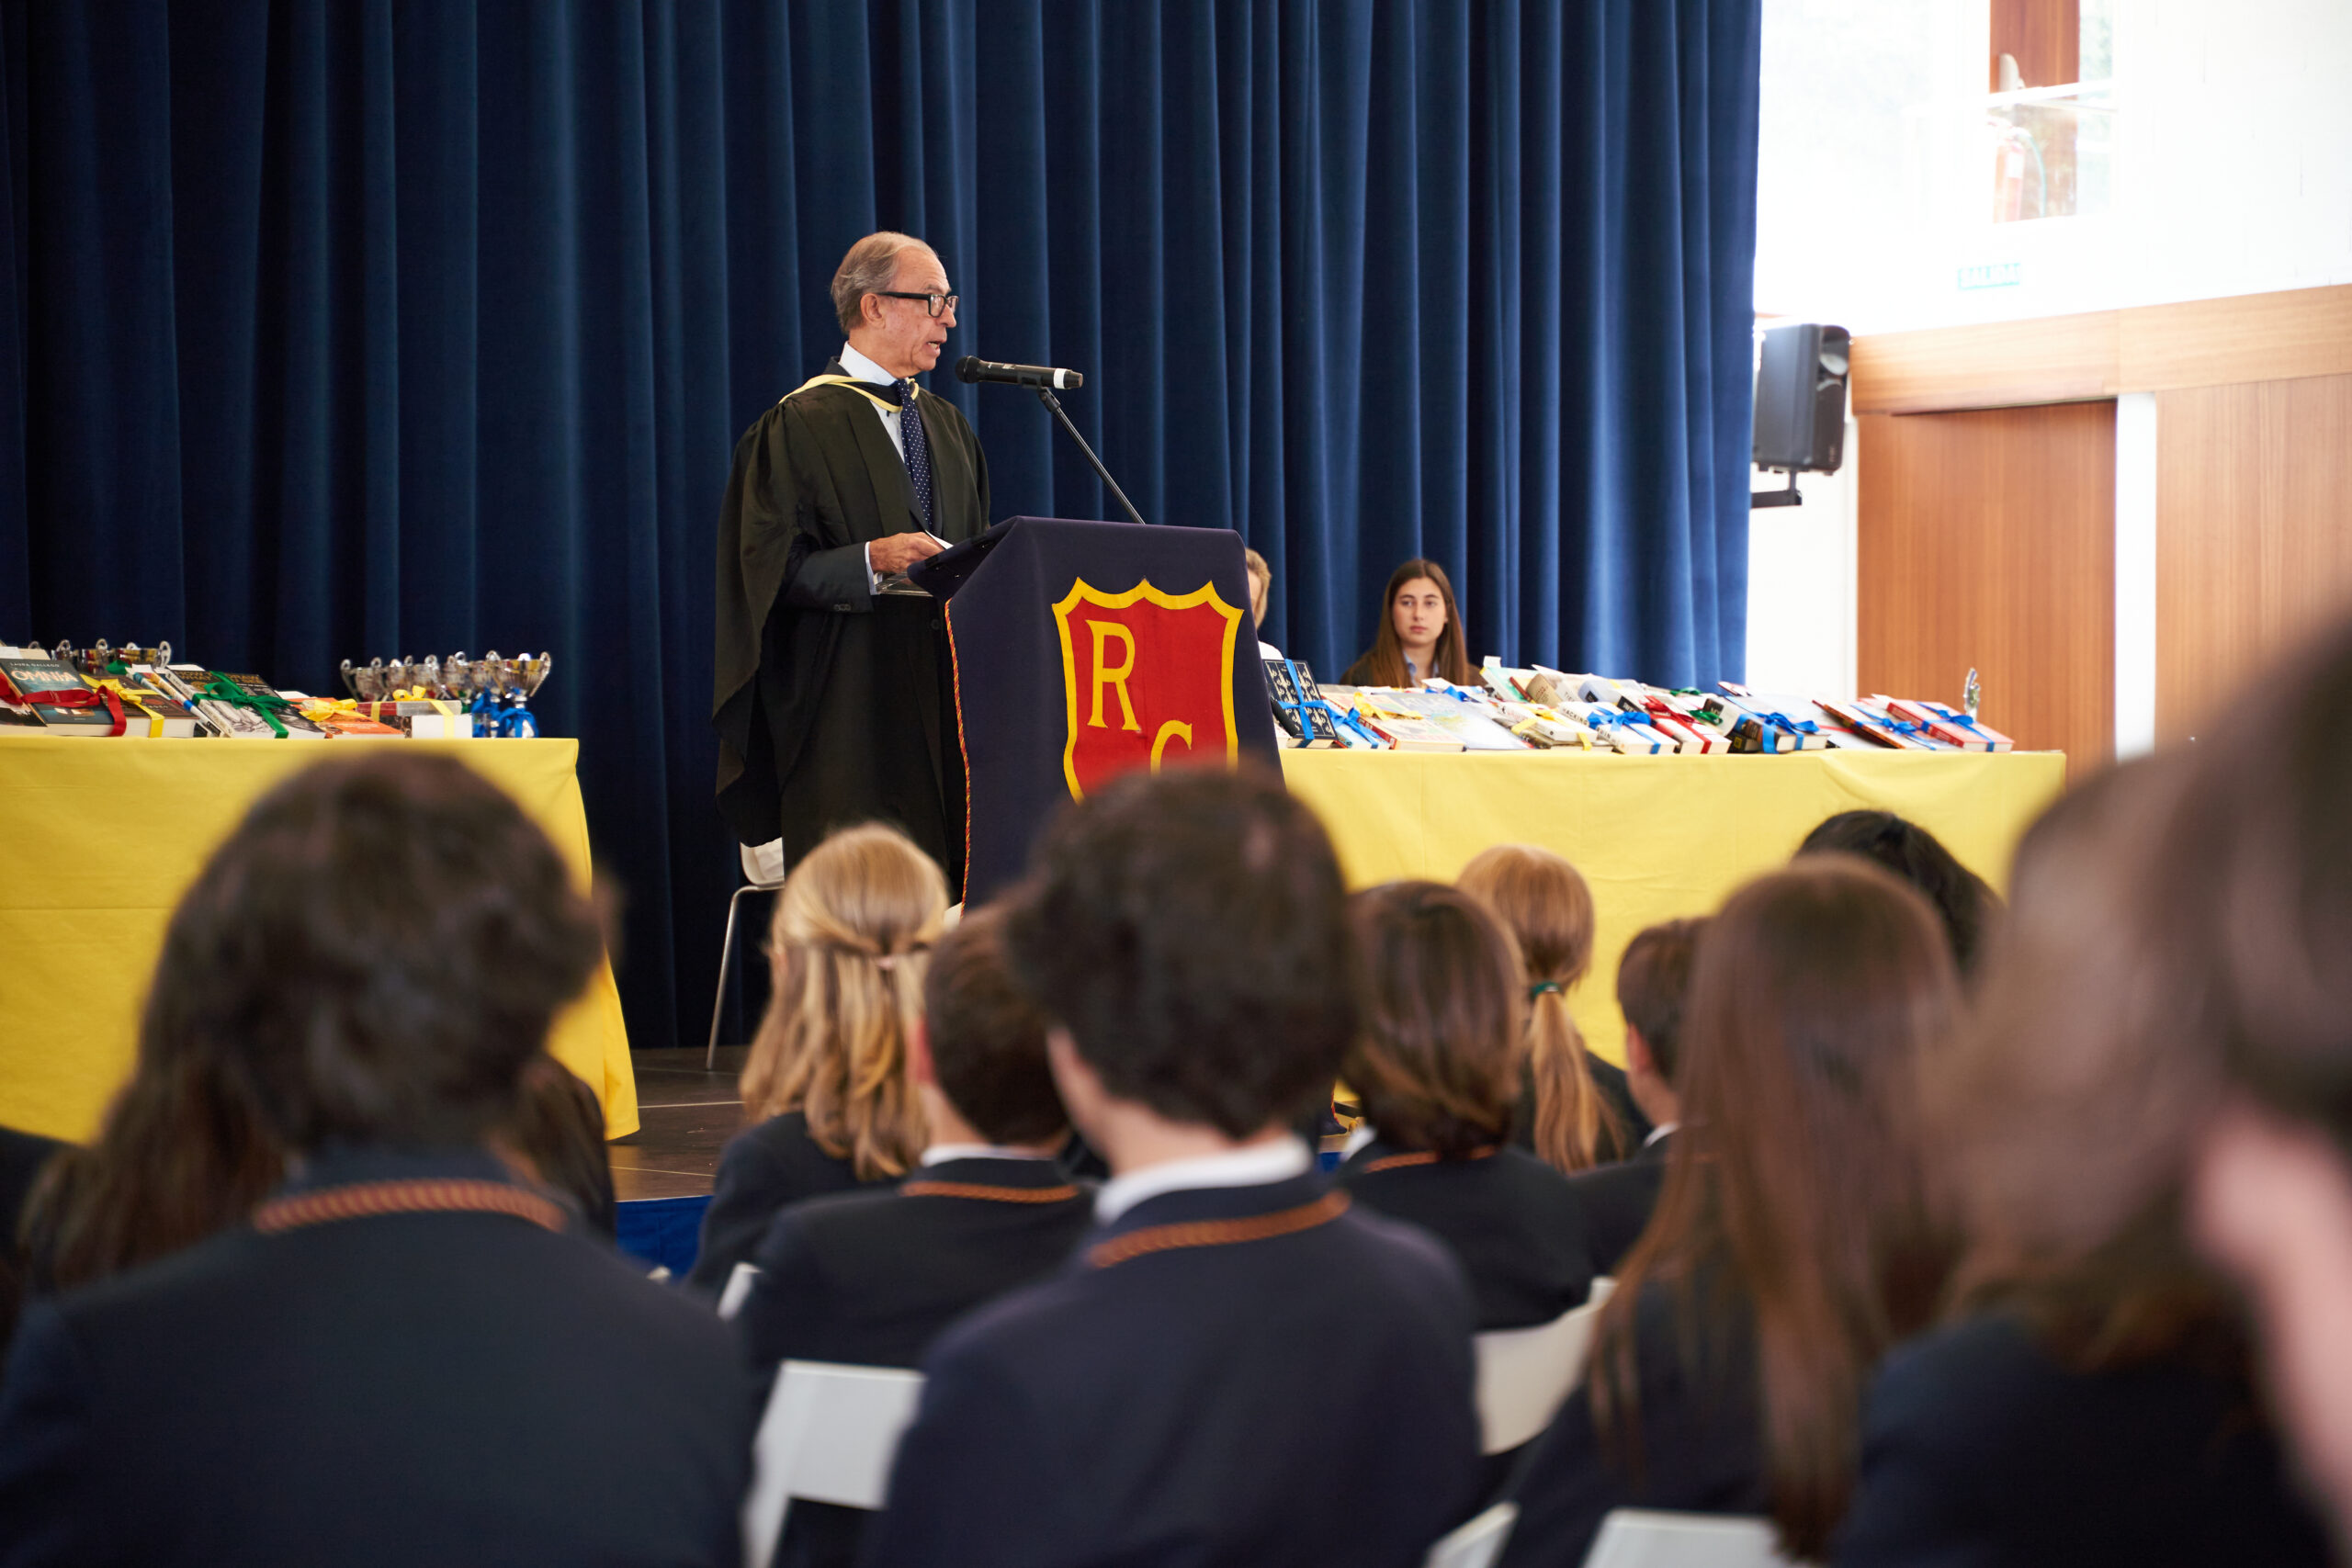 RC 03.06.23 035 scaled - Senior School Prize Giving and Speech Day 2023